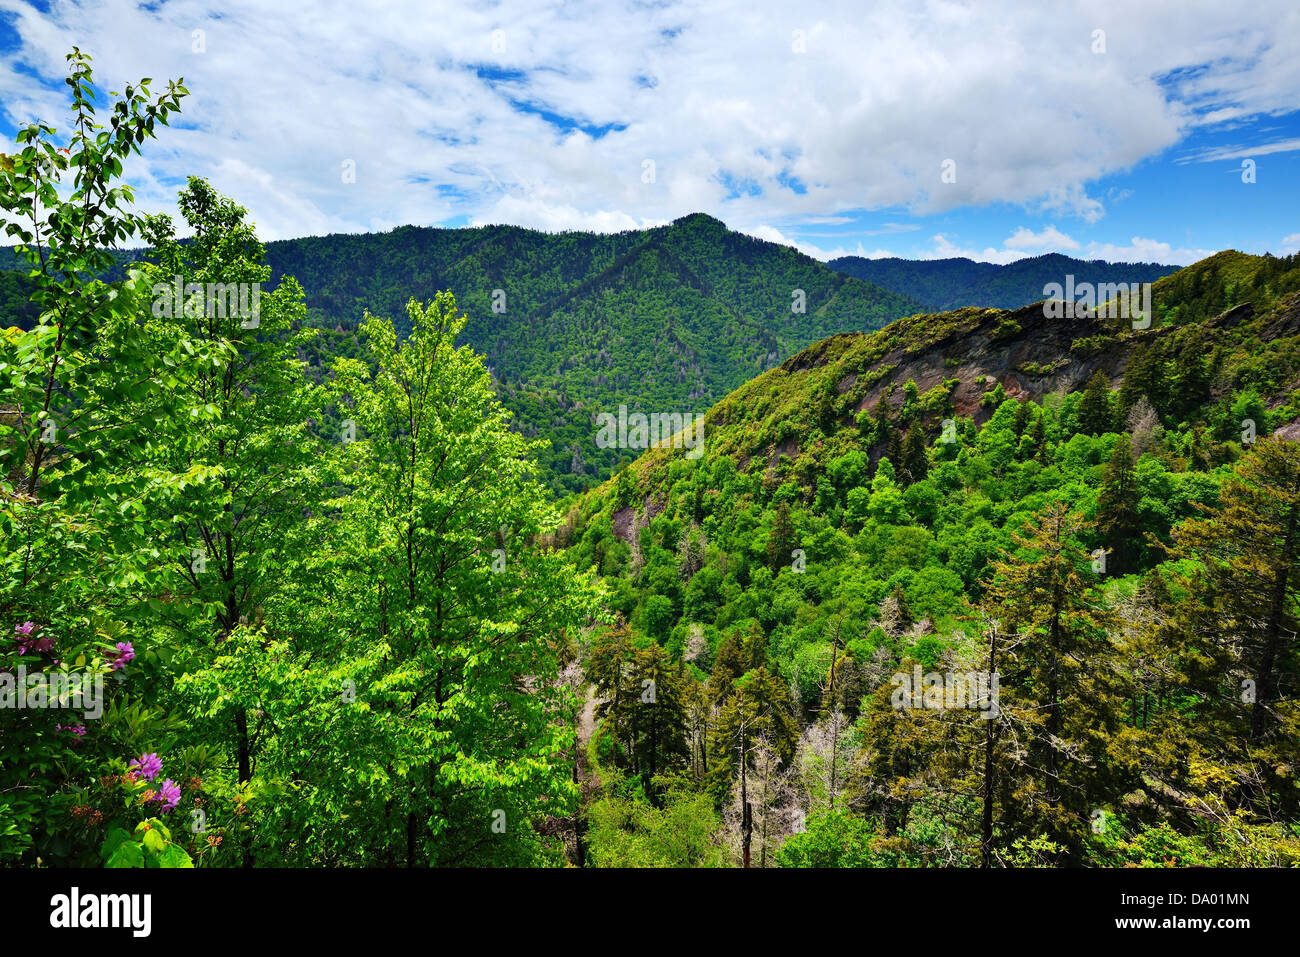 Summer landscape in the Smoky Mountains near Gatlinburg, Tennessee. Stock Photo